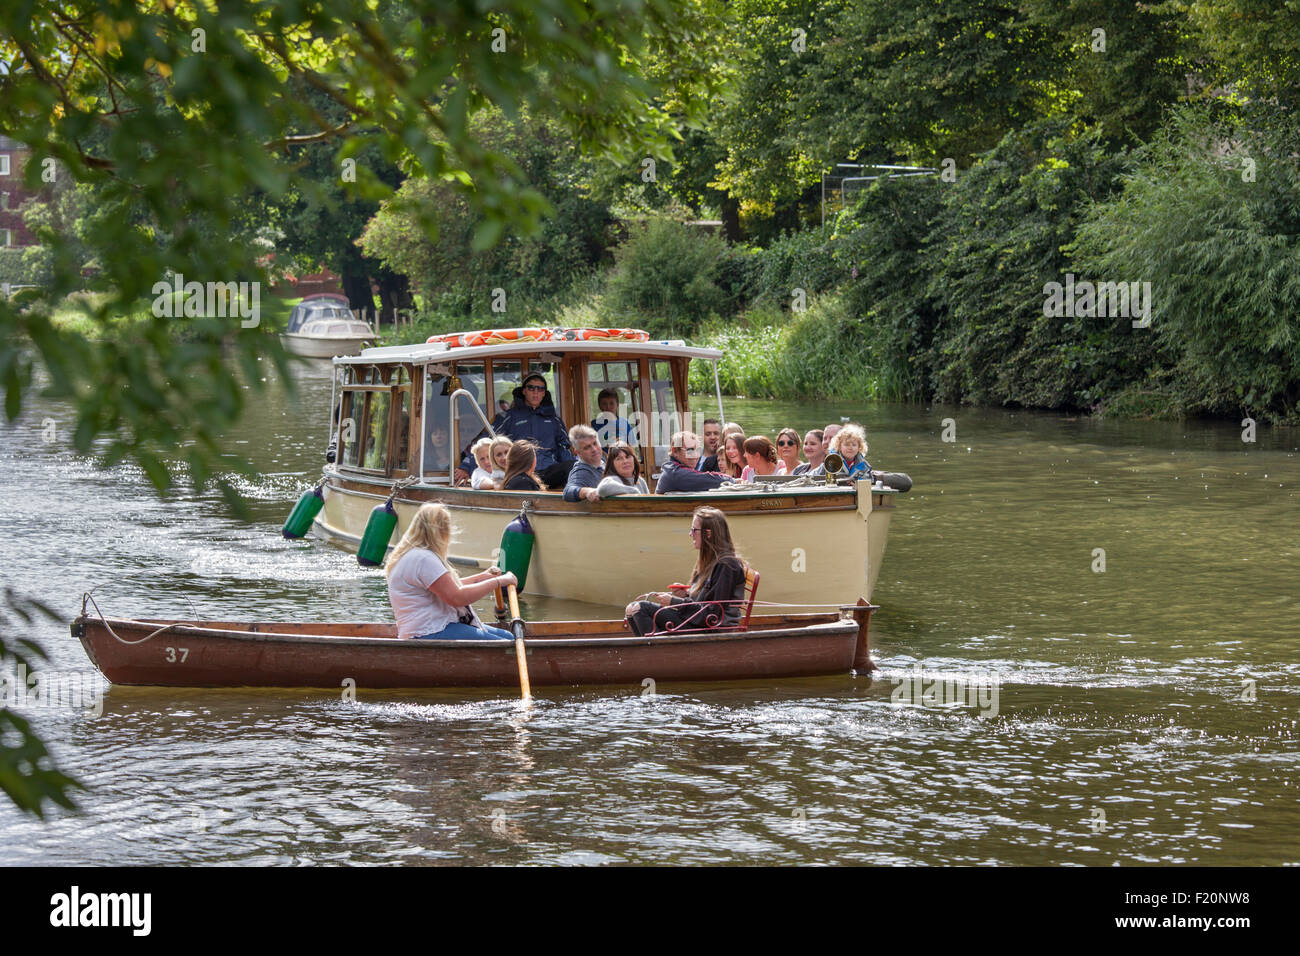 Trip boat close to a rowing boat on the River Avon, Stratford upon Avon, Warwickshire, England, UK Stock Photo